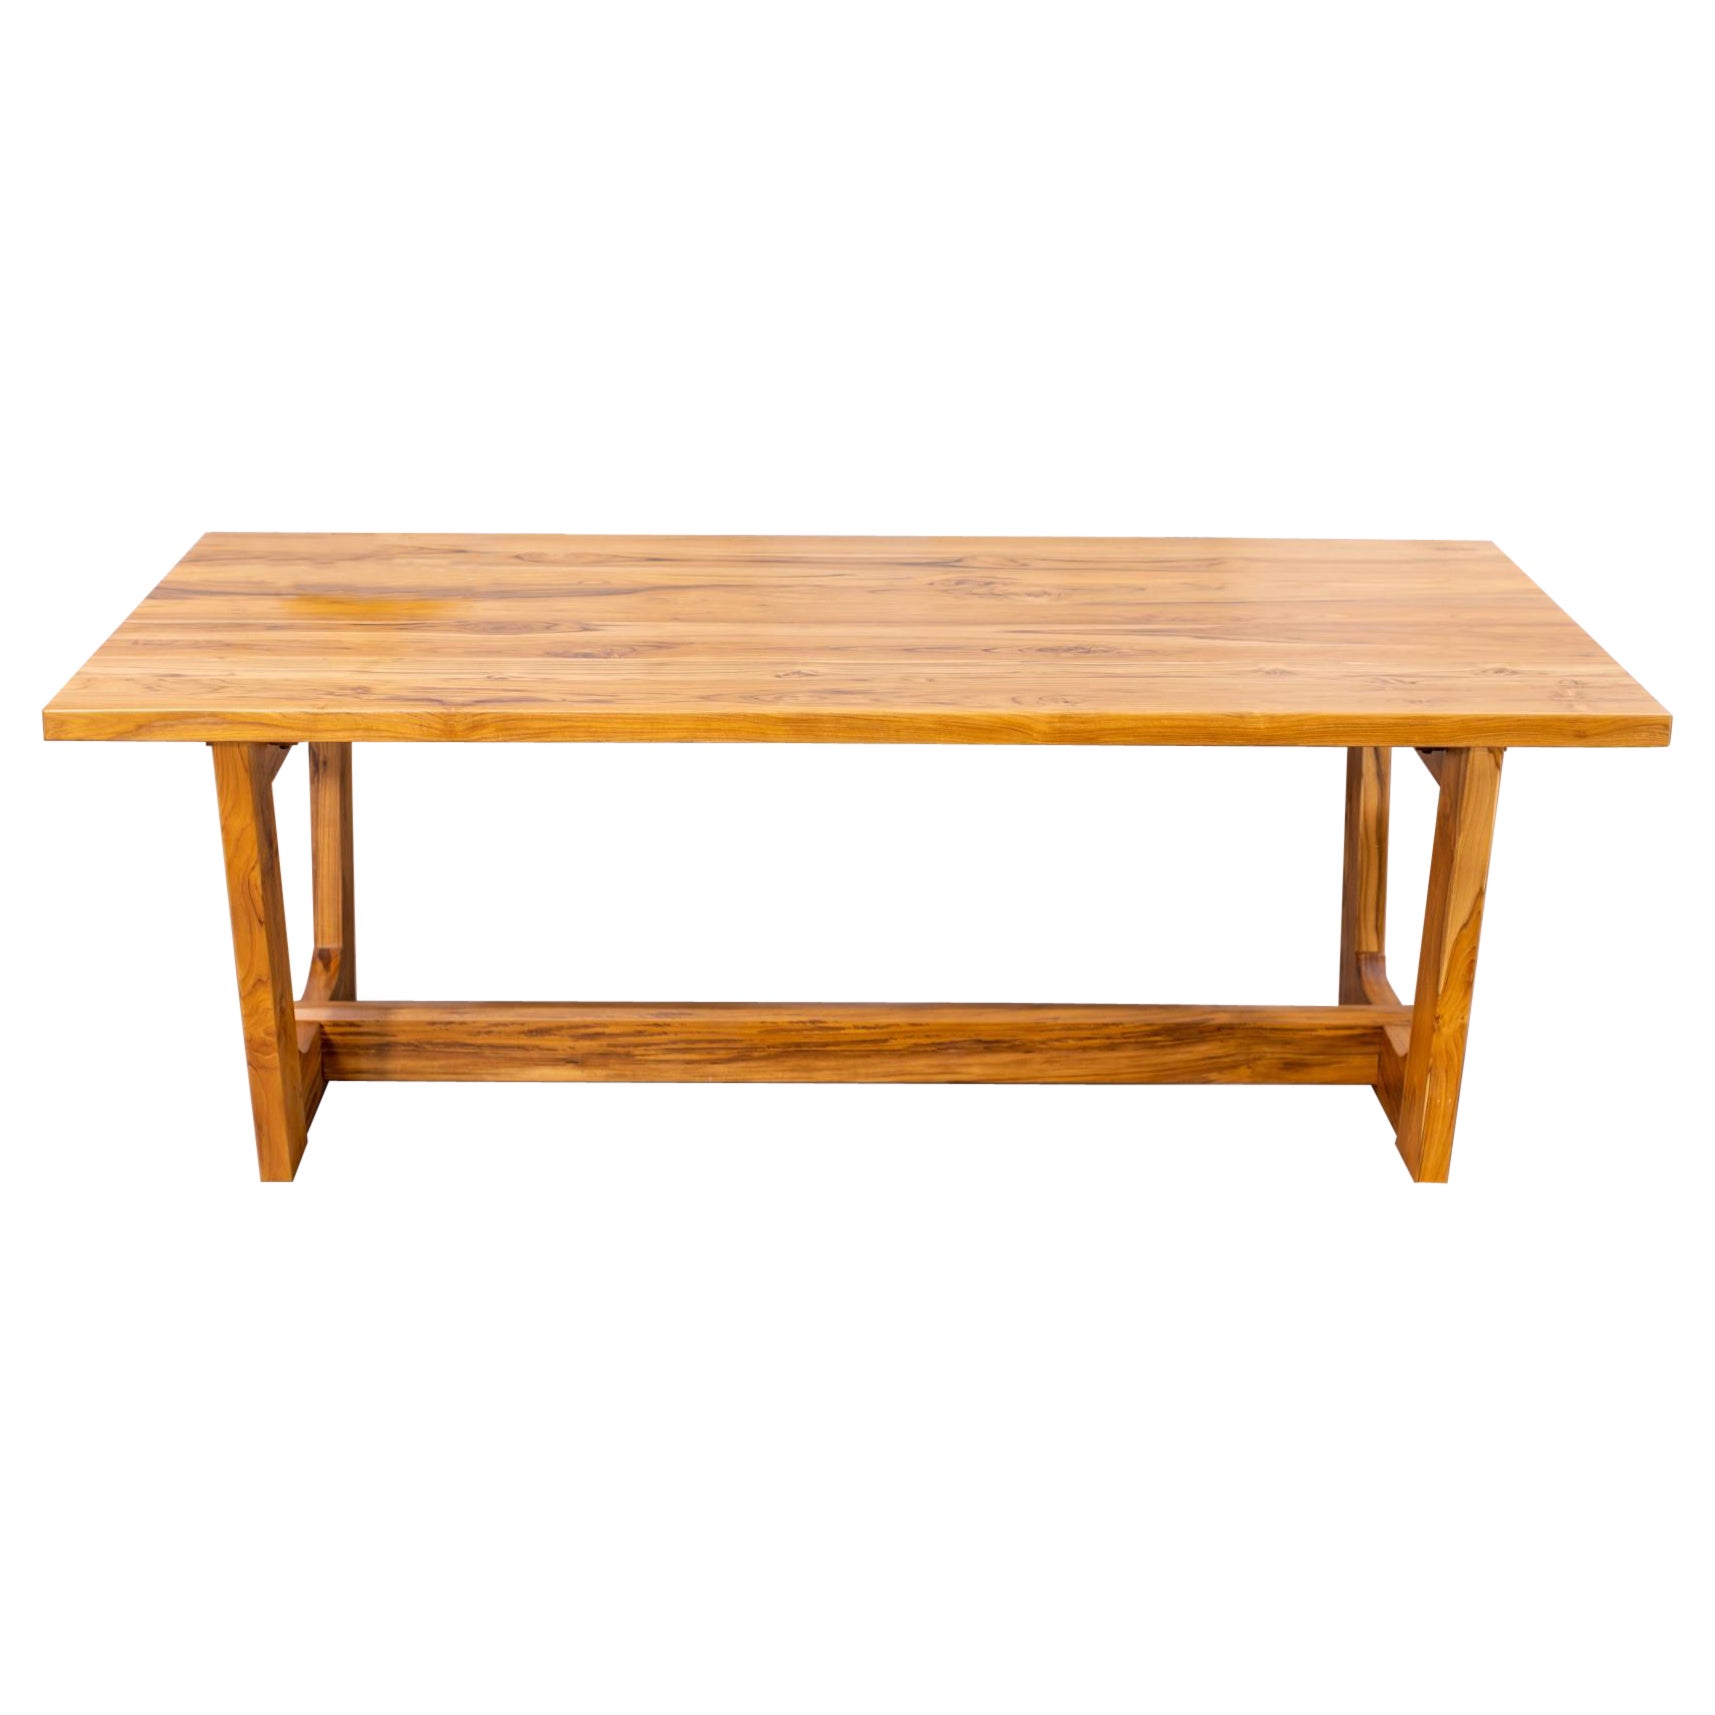 Solid Hardwood Contemporary Trestle Dining Table in a Smooth Natural Teak Finish For Sale